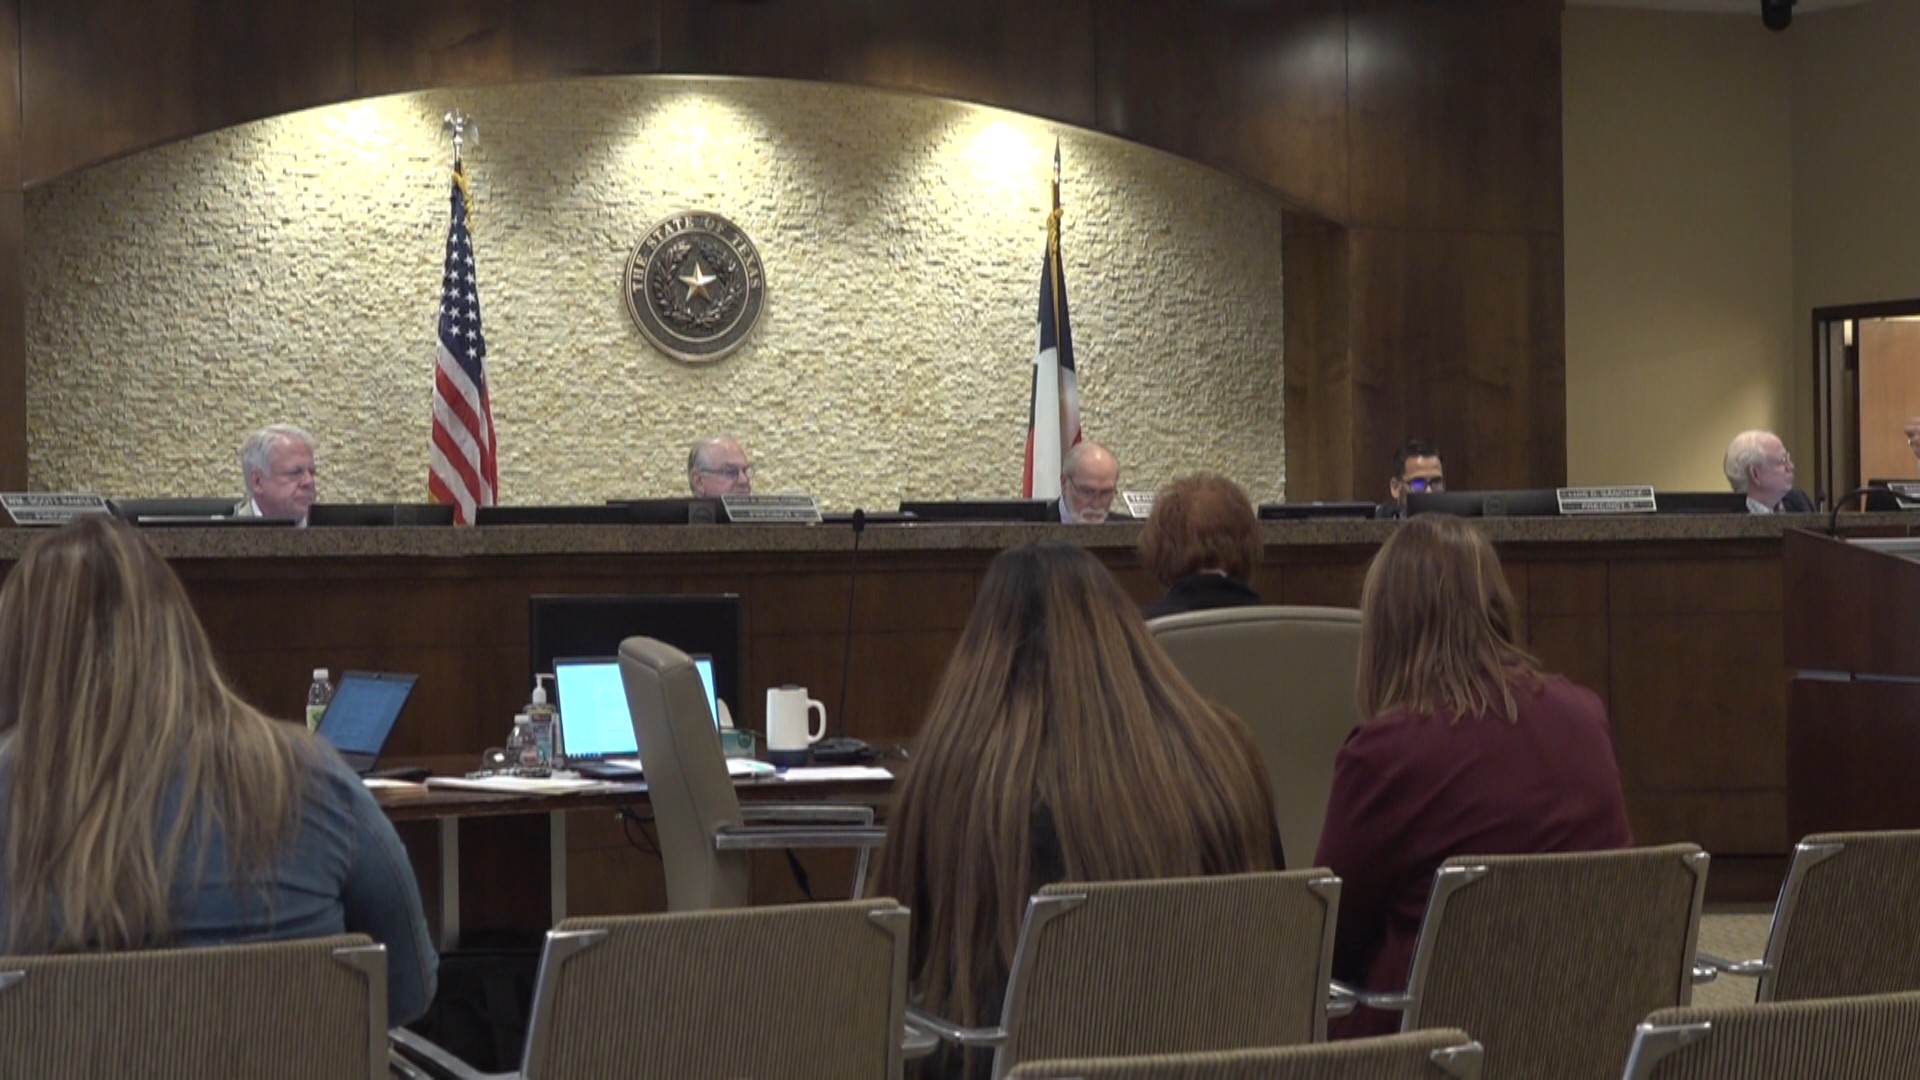 In a 4-1 vote, Midland County Commissioners approved an action item to proclaim Midland County a safe place for the unborn.